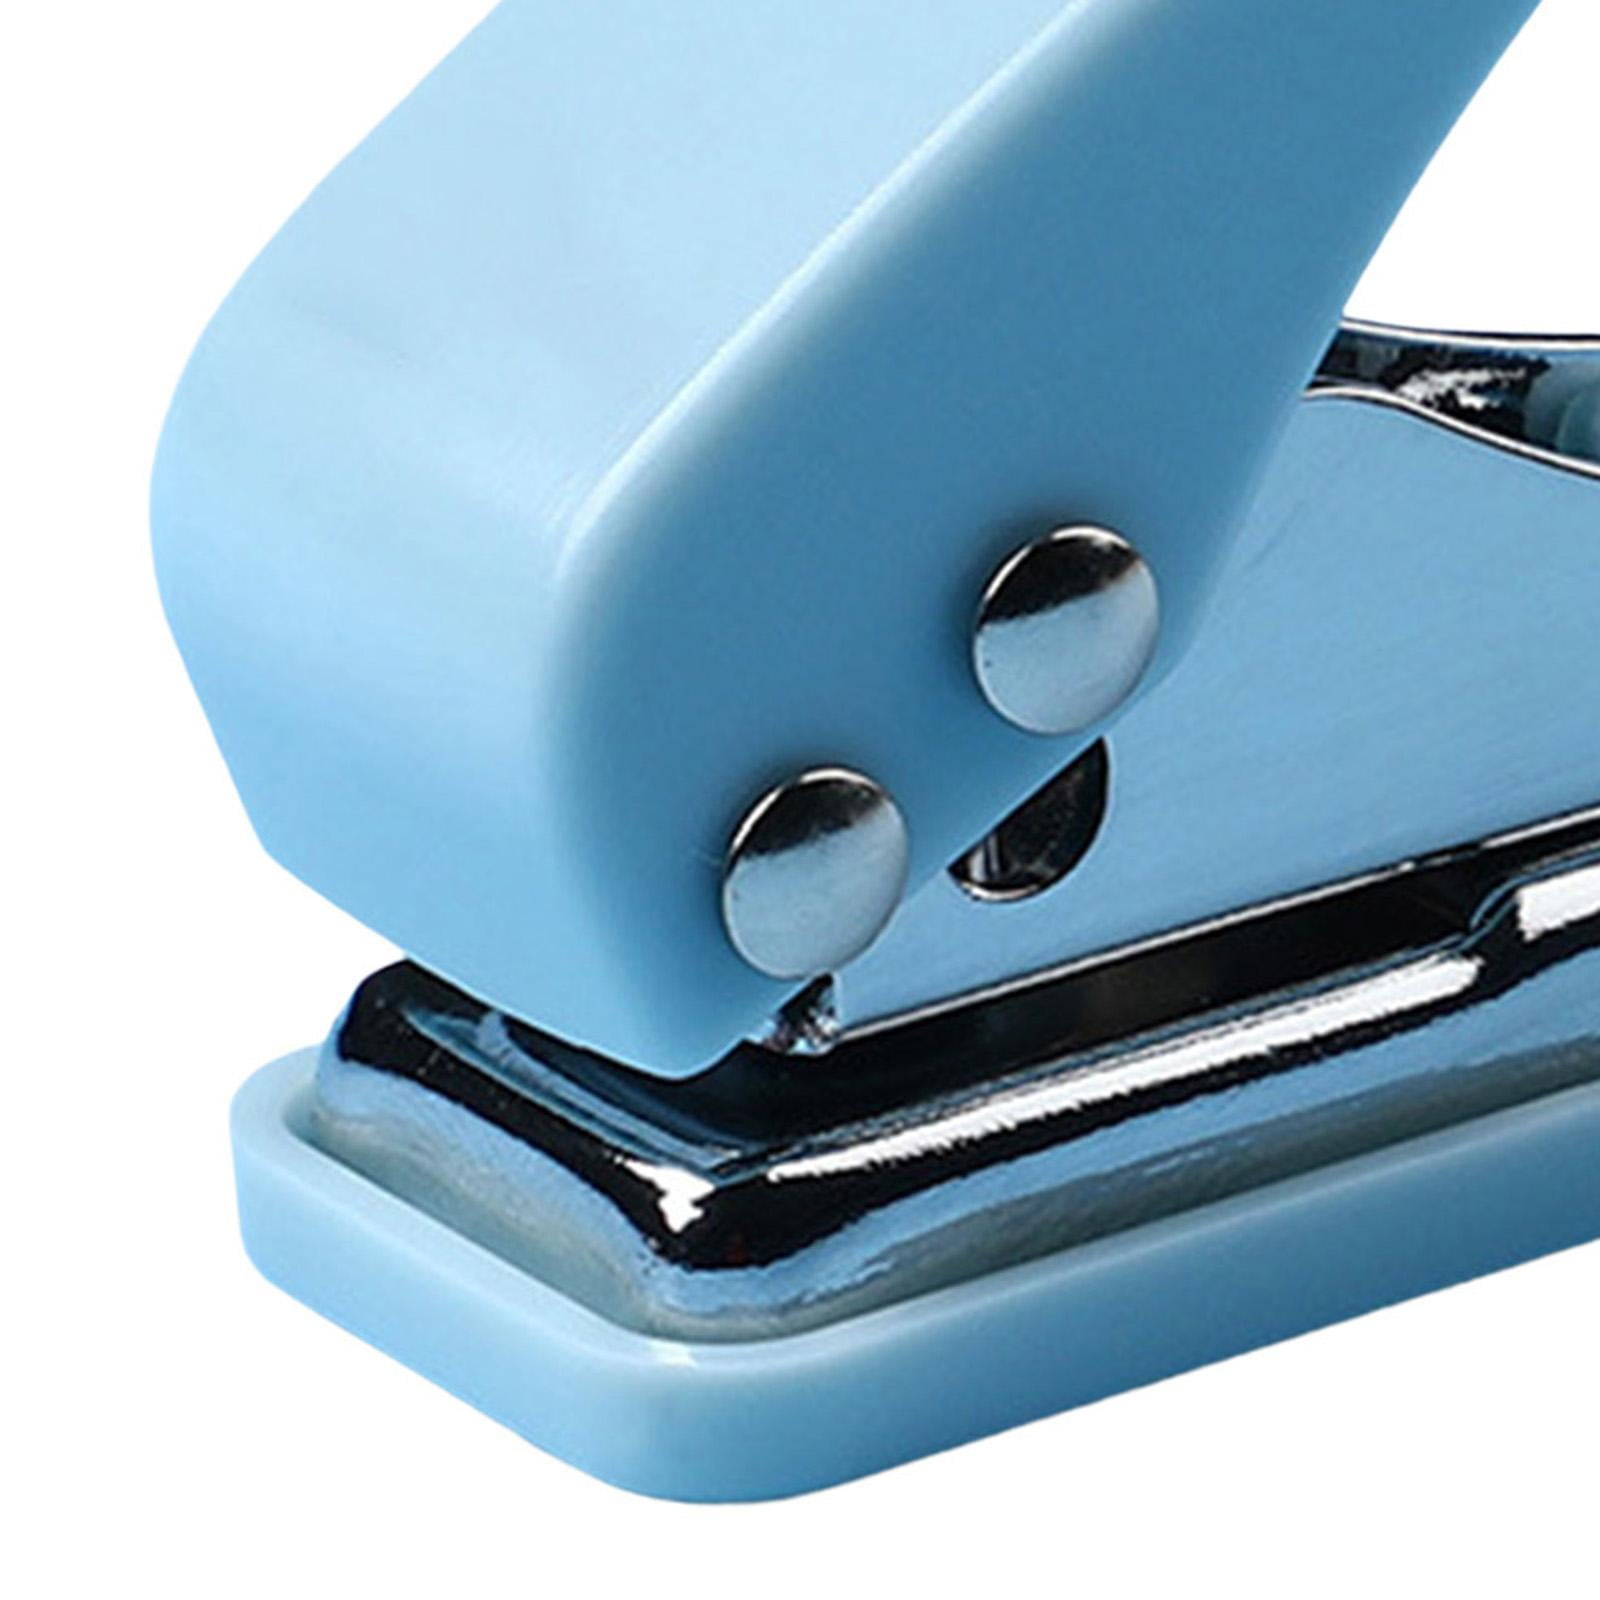 Mini Small Hole Puncher Blue Color, 10 Sheet Paper Hole Puncher Capacity Single Hole Puncher for Office Use or Gift for Students (Blue)